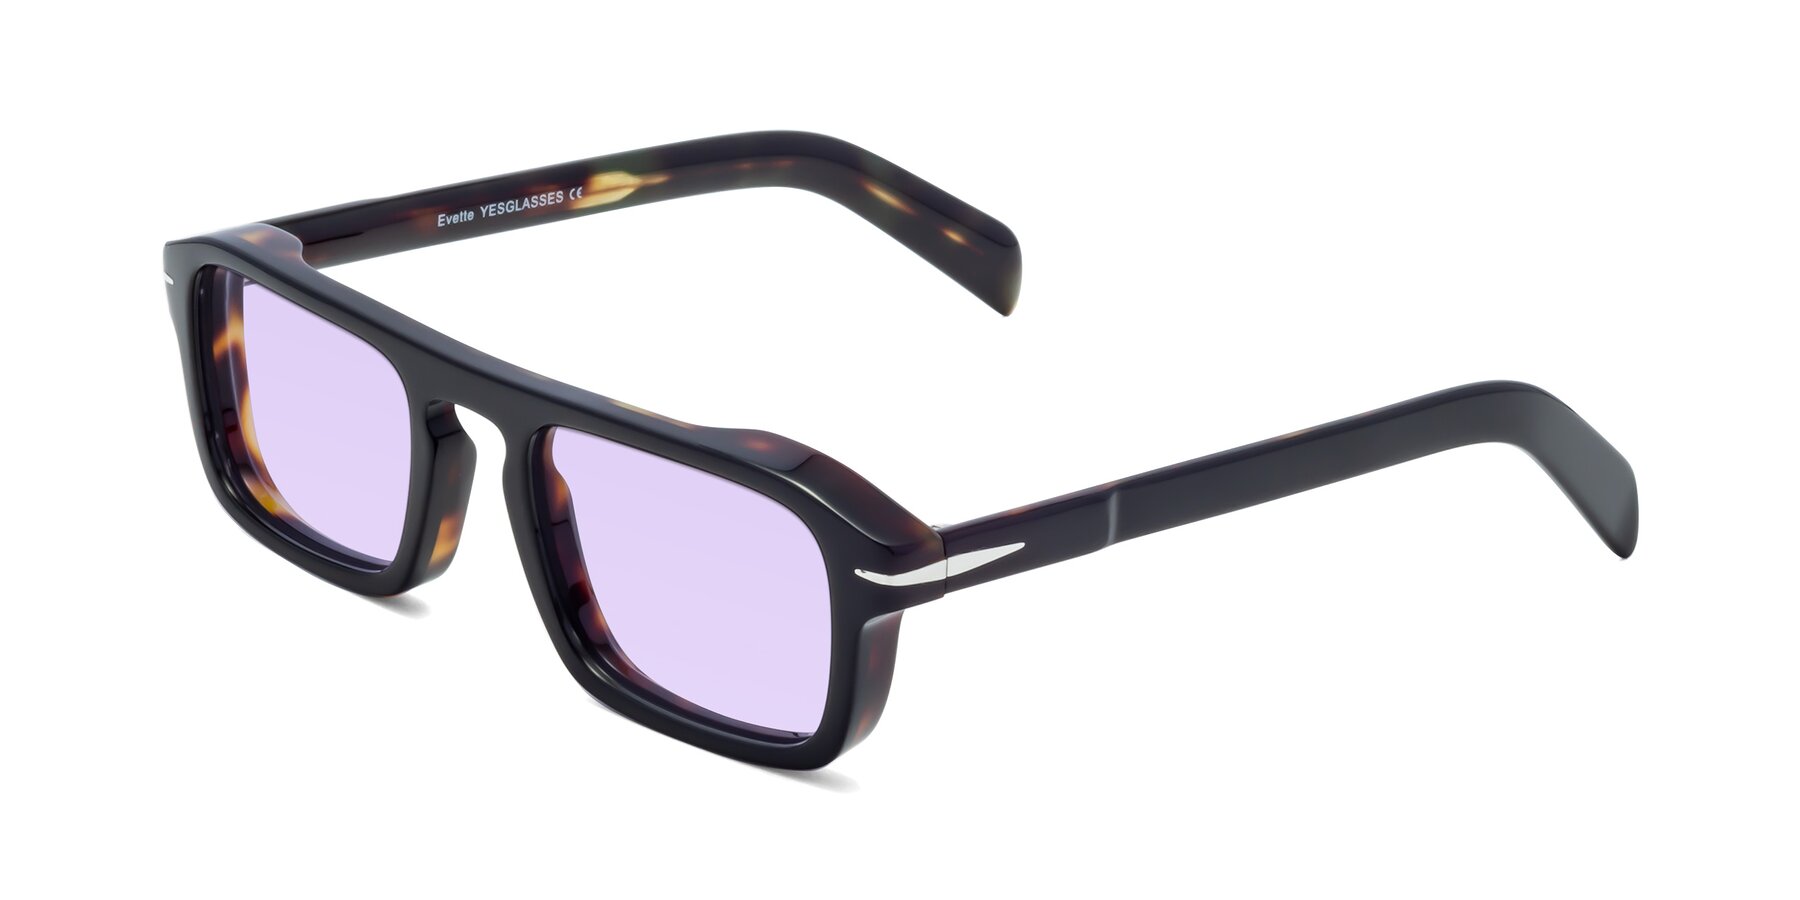 Angle of Evette in Black-Tortoise with Light Purple Tinted Lenses